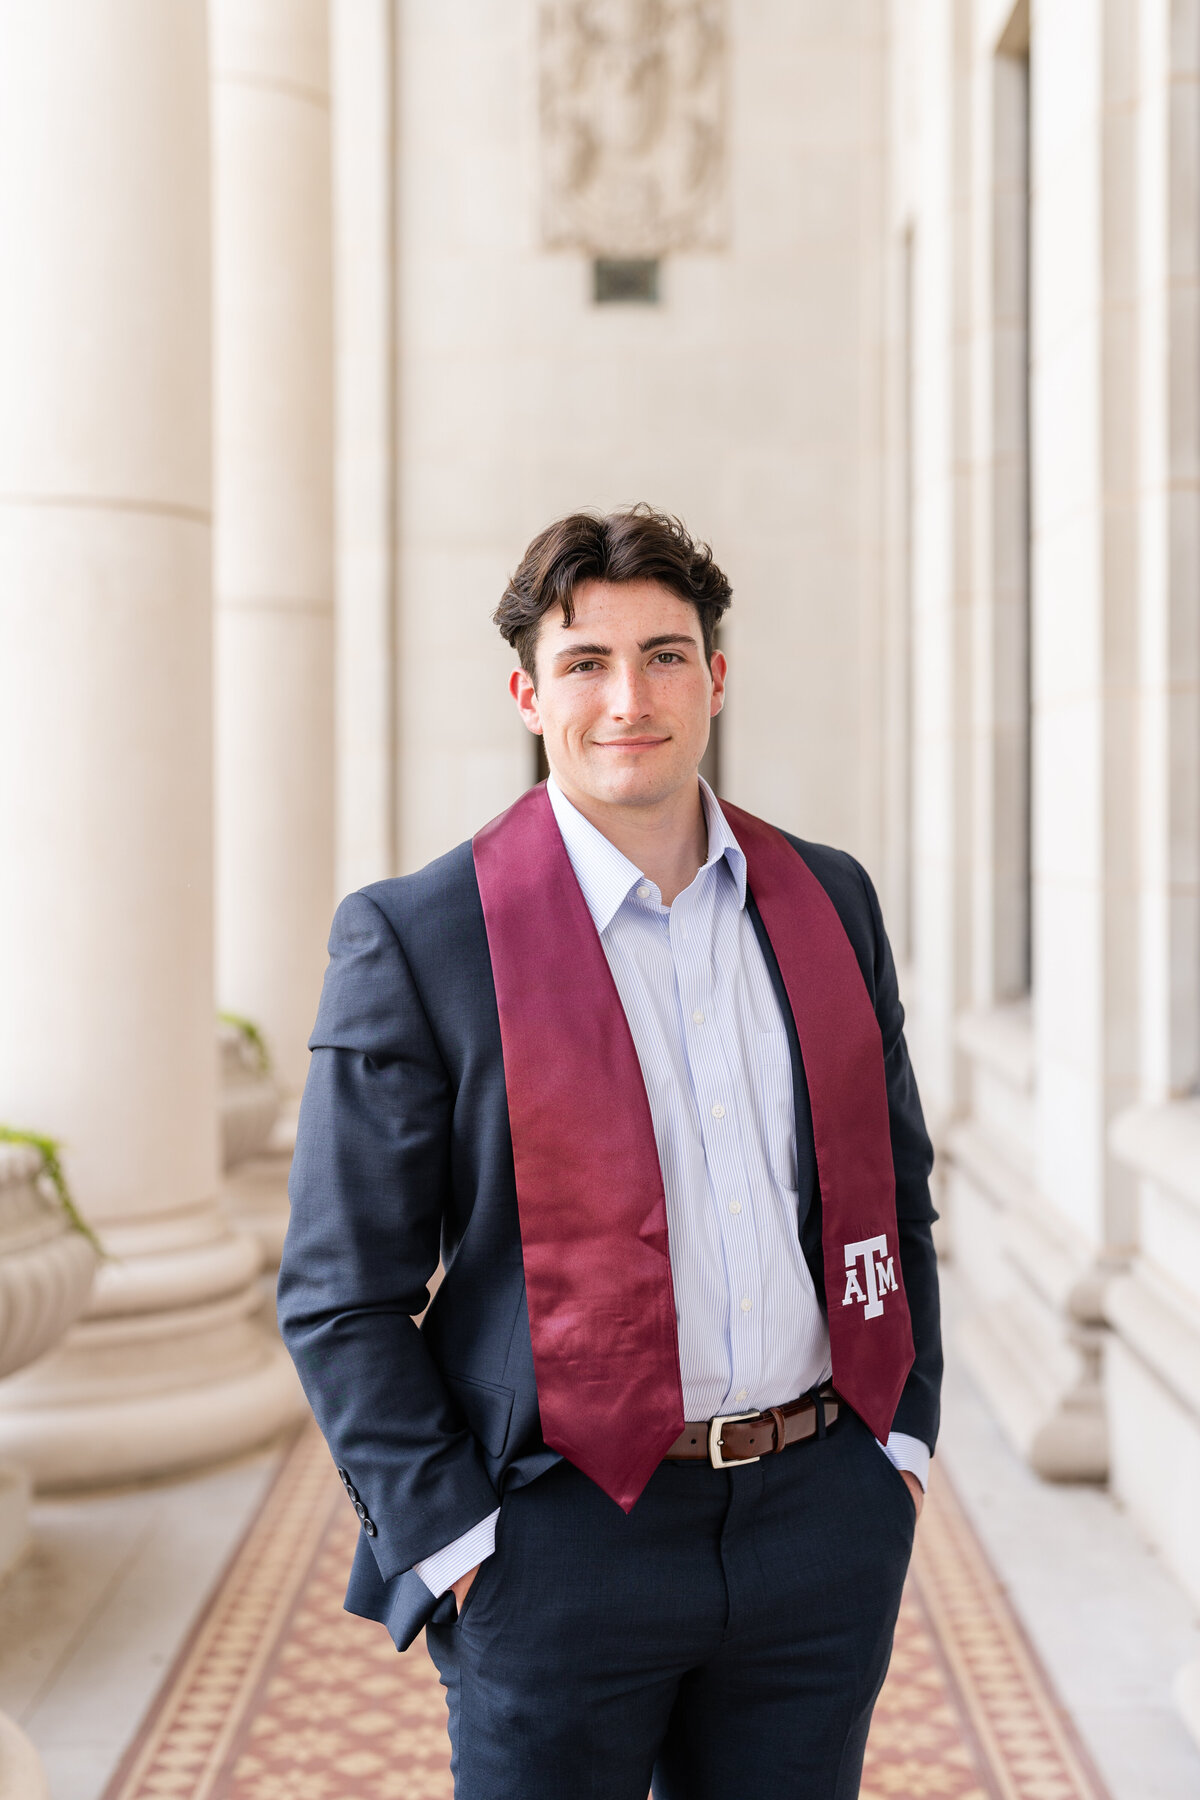 Texas A&M senior guy standing with hands in pockets and wearing a suit with Aggie stole in columns at Administration Building